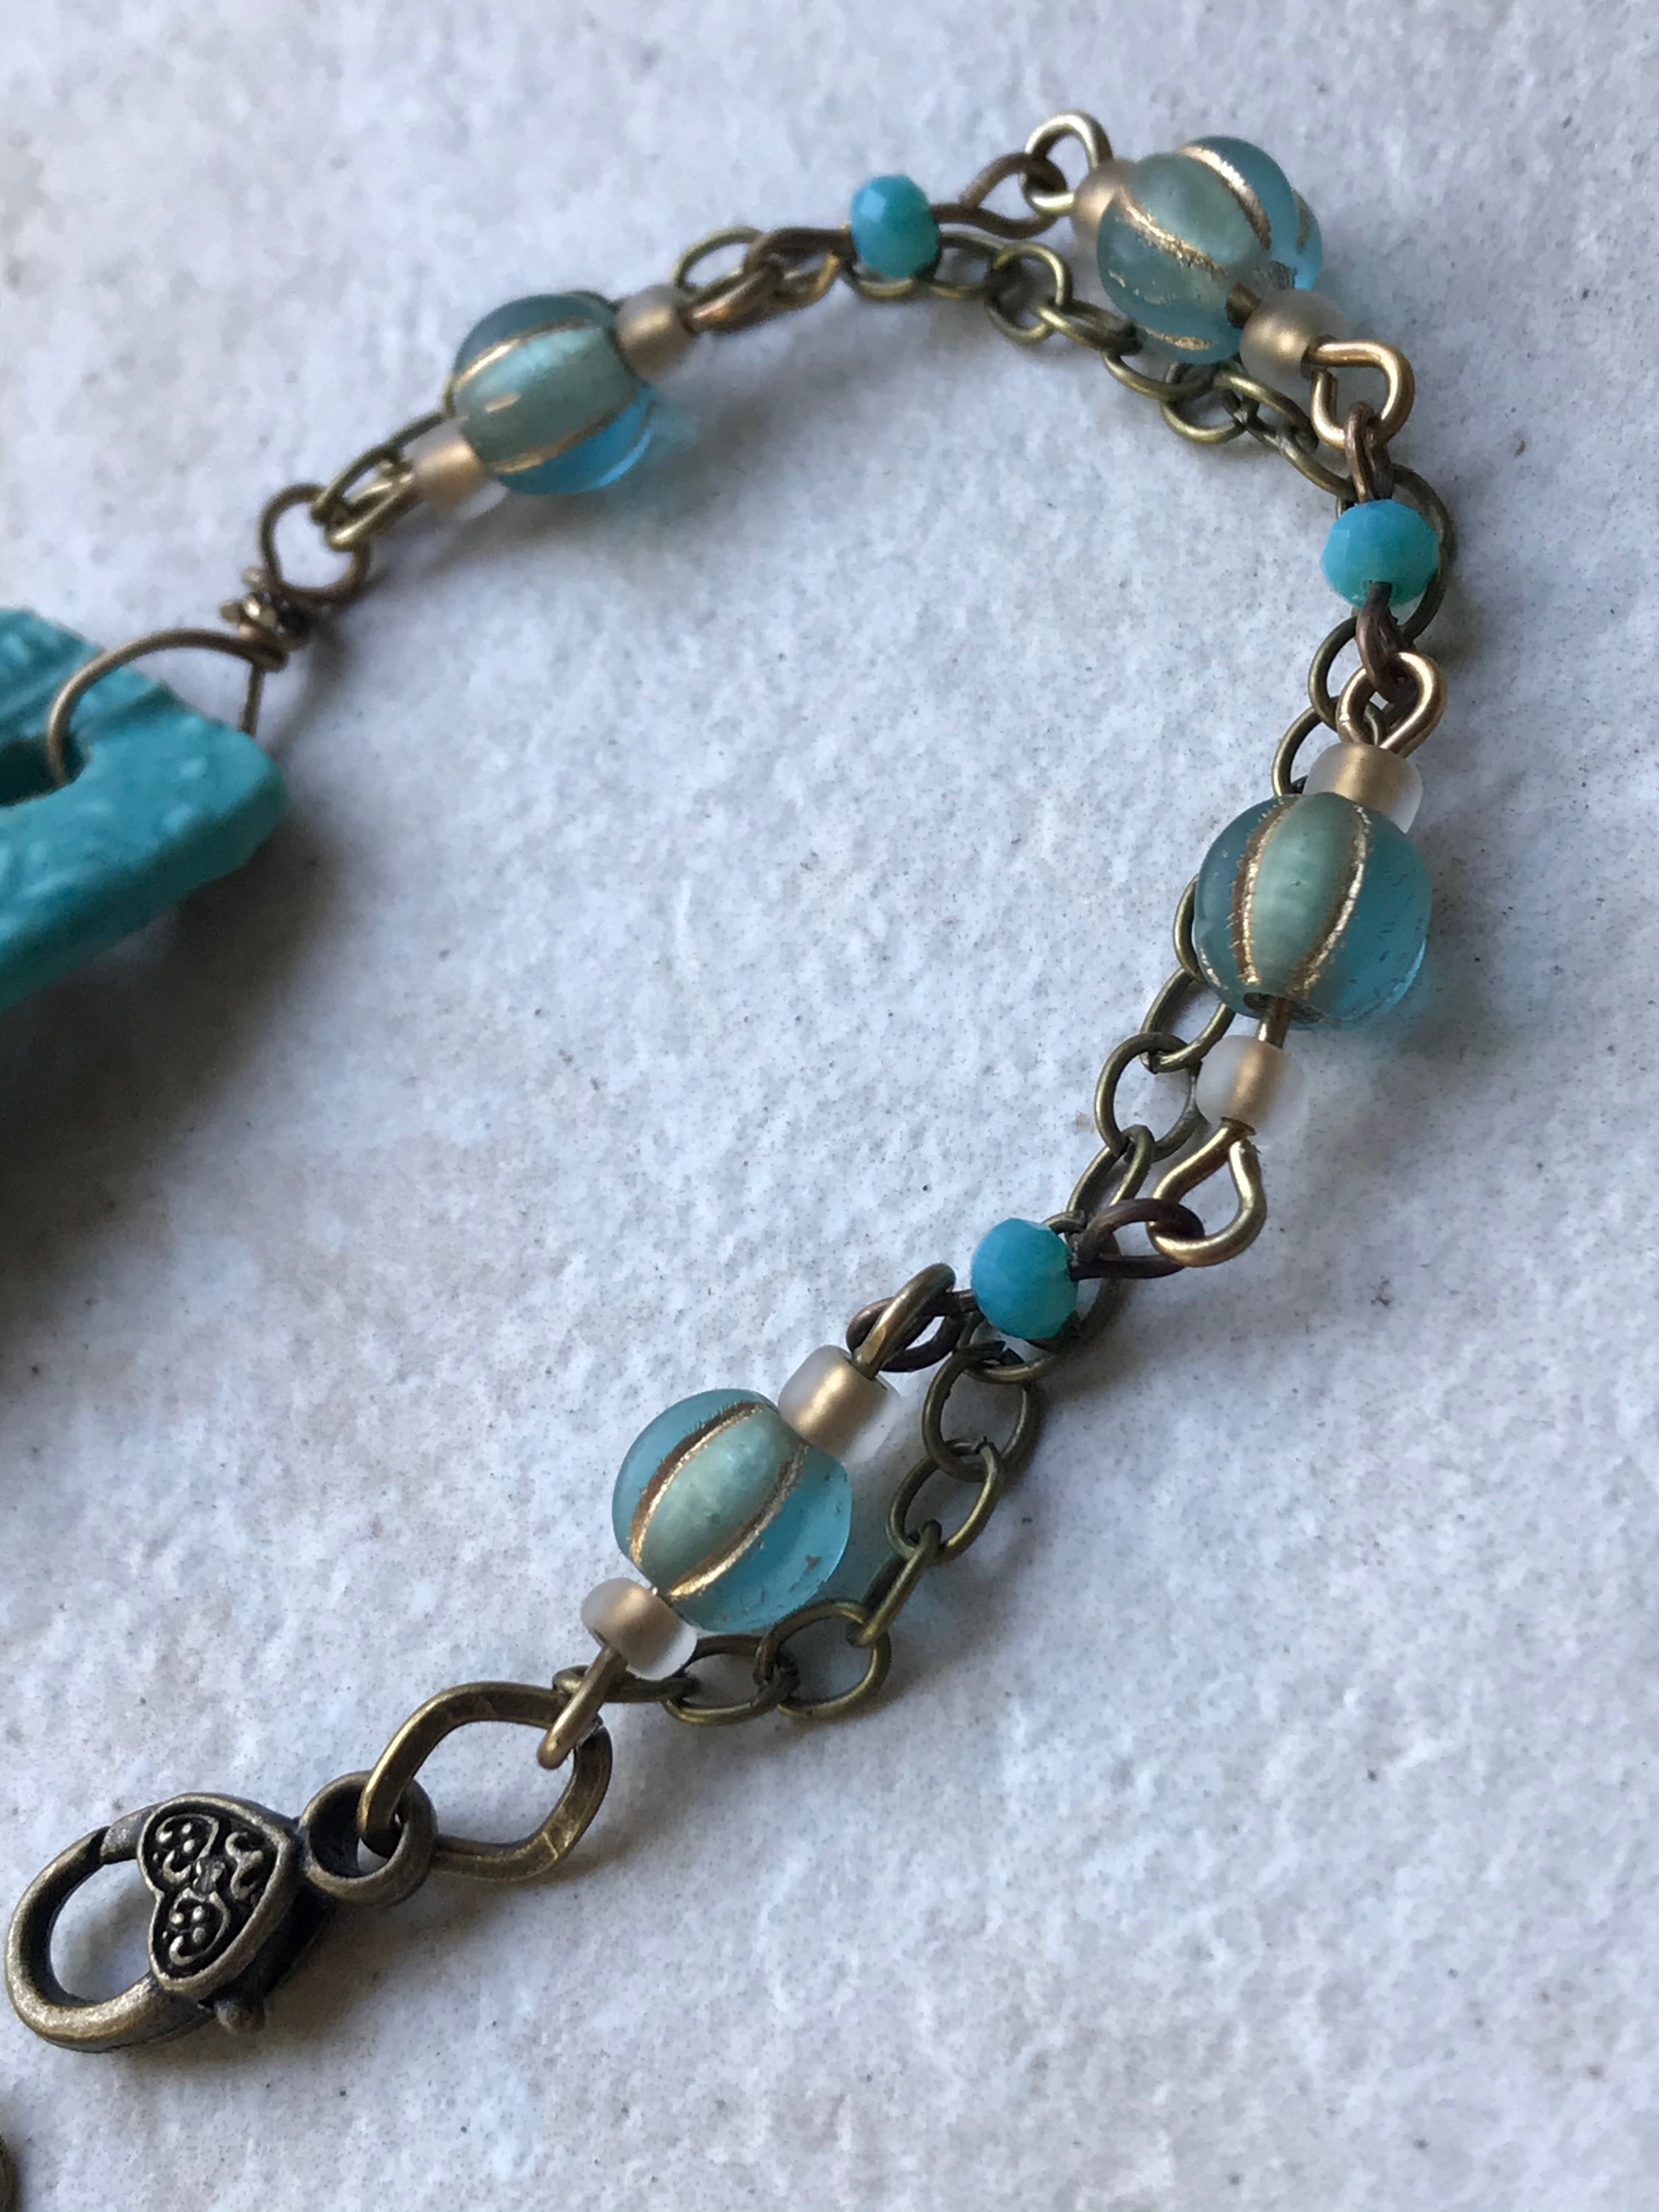 Porcelain Turquoise Beaded Bracelet with Glass Melon Beads